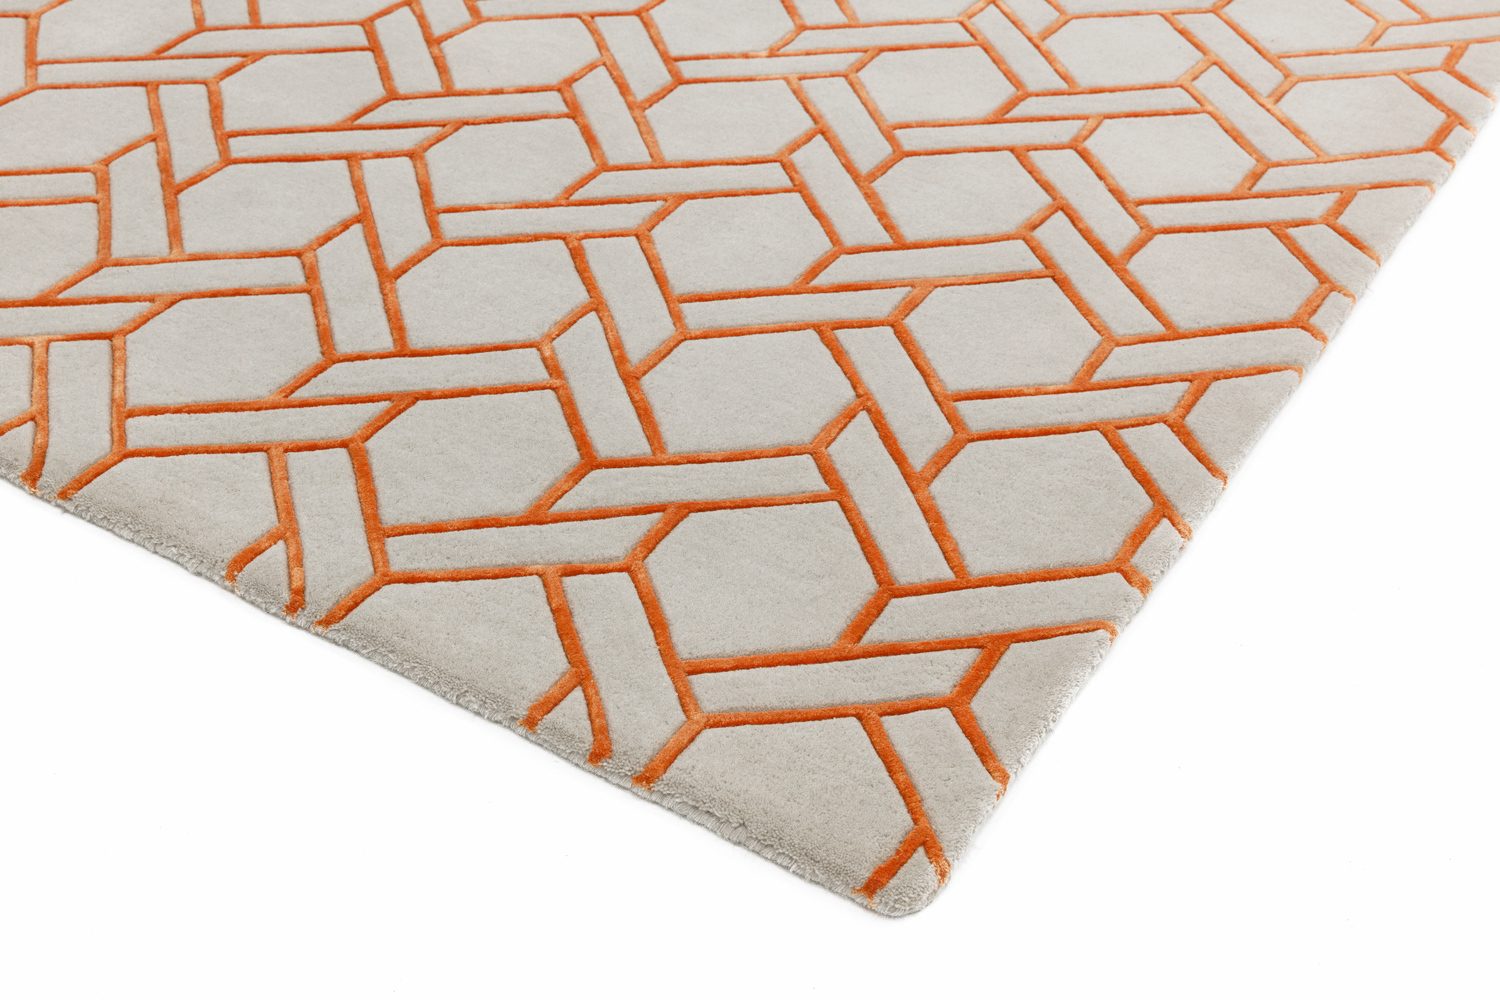 Premium quality tufted rugs in precise hand carved geometric designs